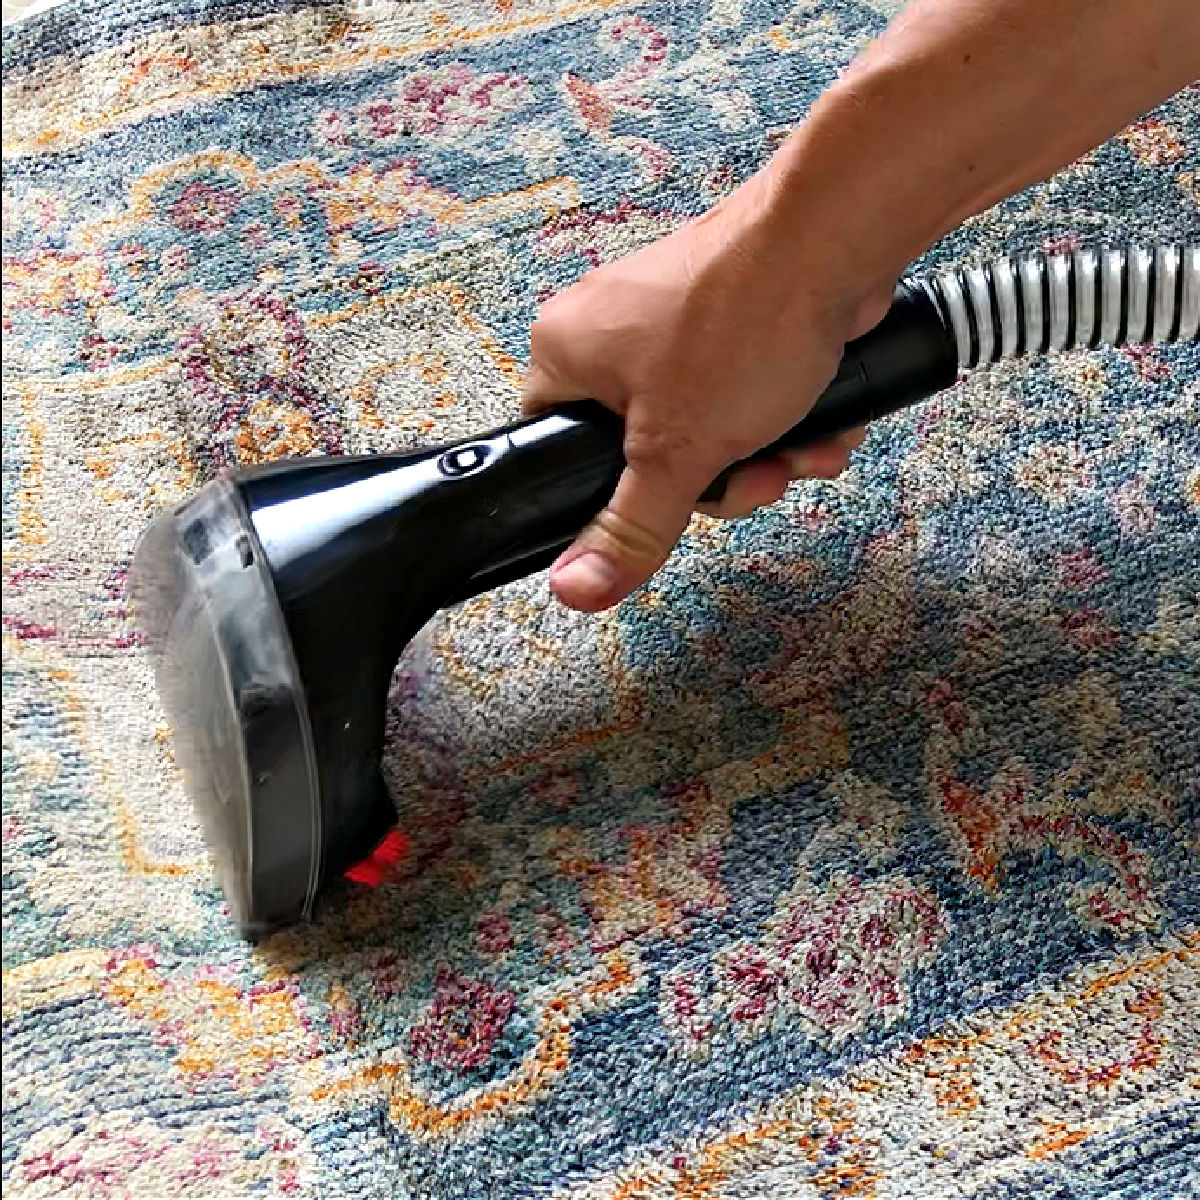 https://www.abbottsathome.com/wp-content/uploads/2020/06/Clean-Area-Rugs-At-Home-Bissell-Cleaner.jpg